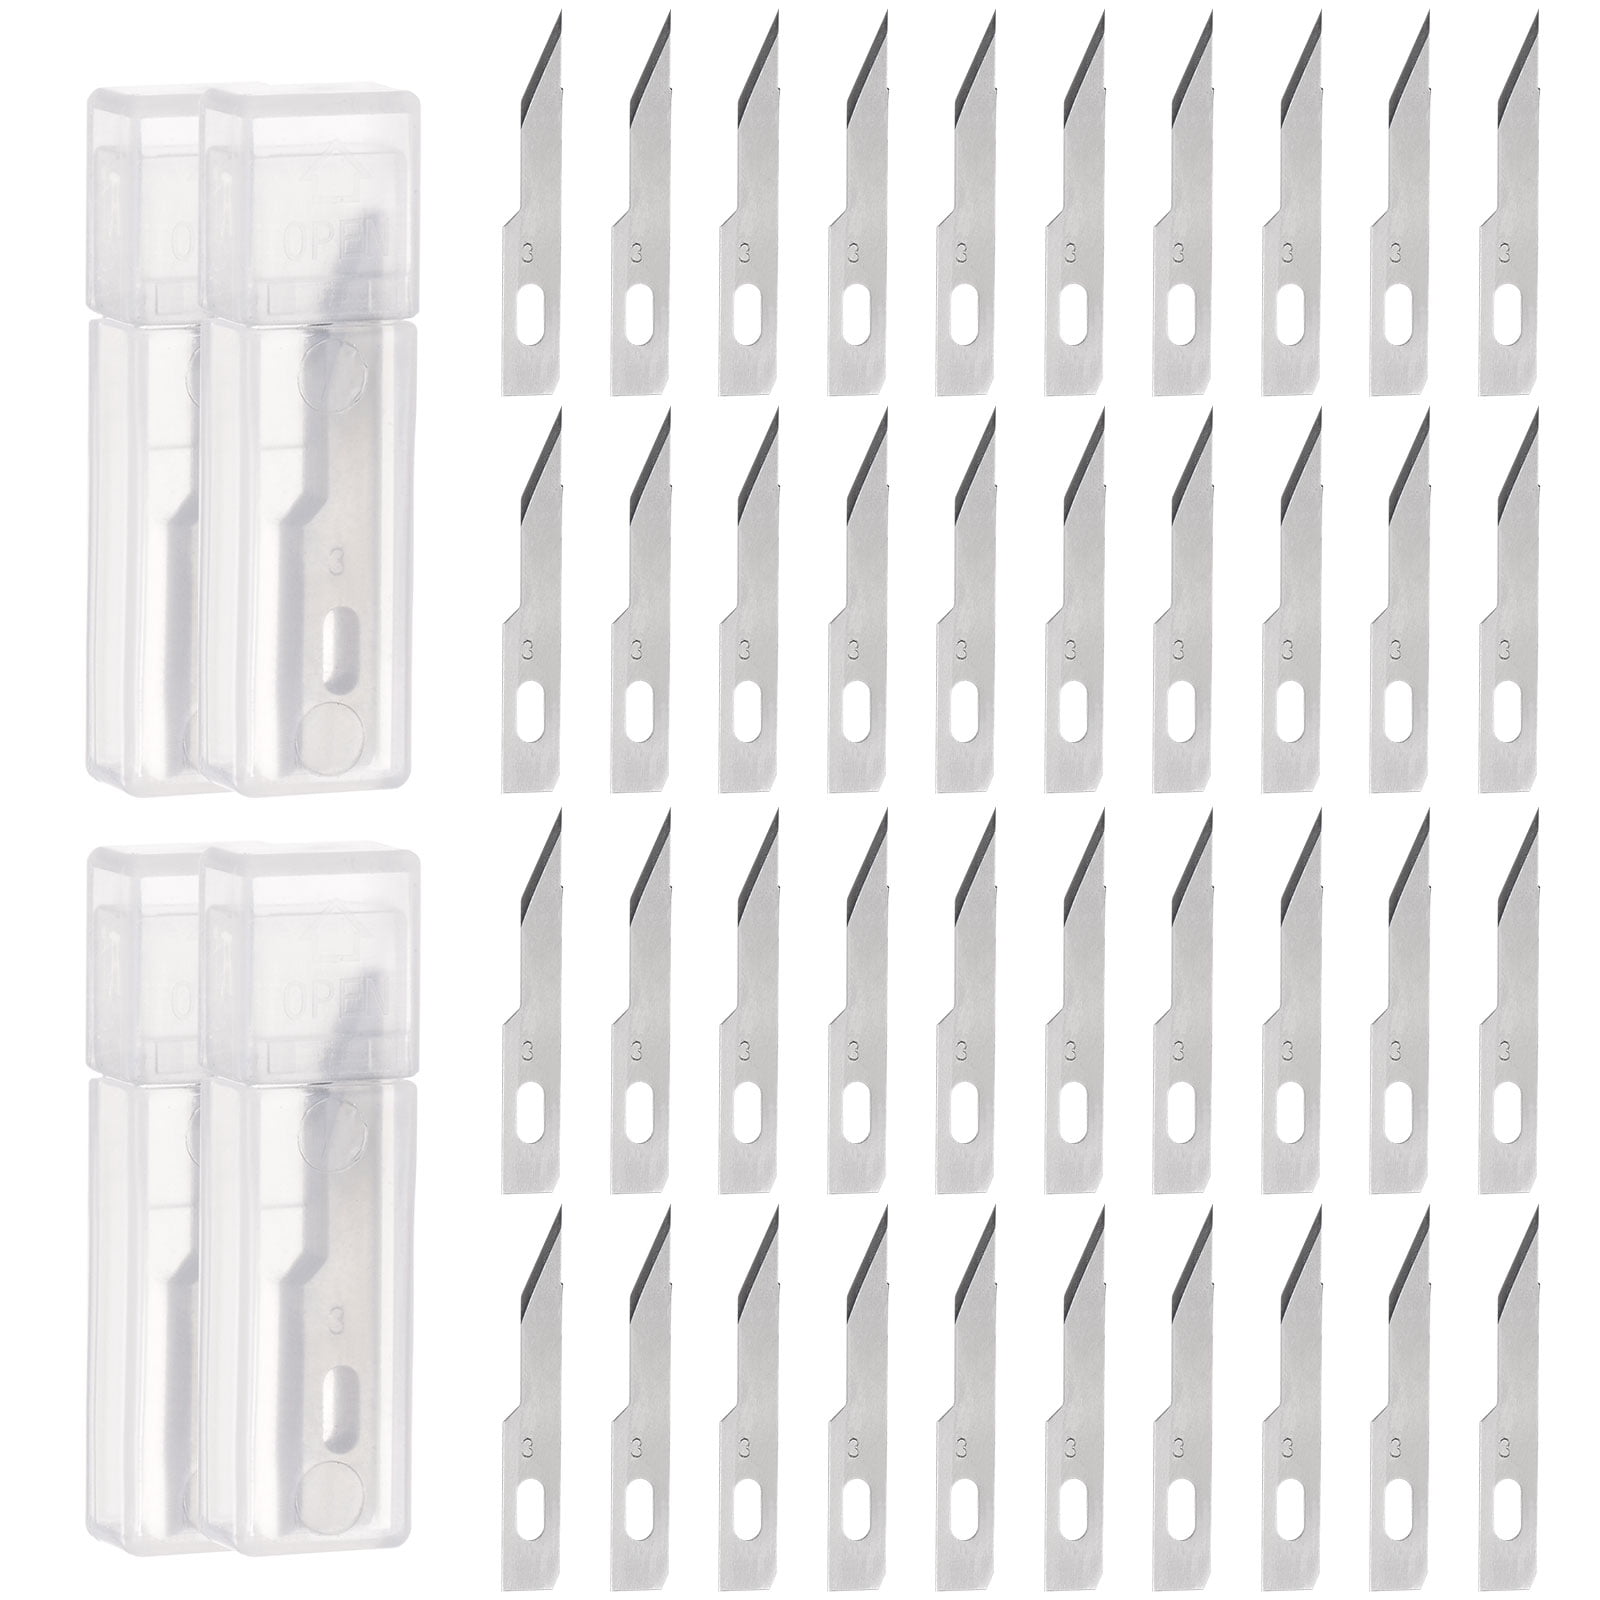 100 Packs Replacement Blades, Quality Black Carbon Steel, Sharper, Rust Resistant, Blades for X-acto Knife Scoring Sharp Blades Exacto Set Pack Hobby